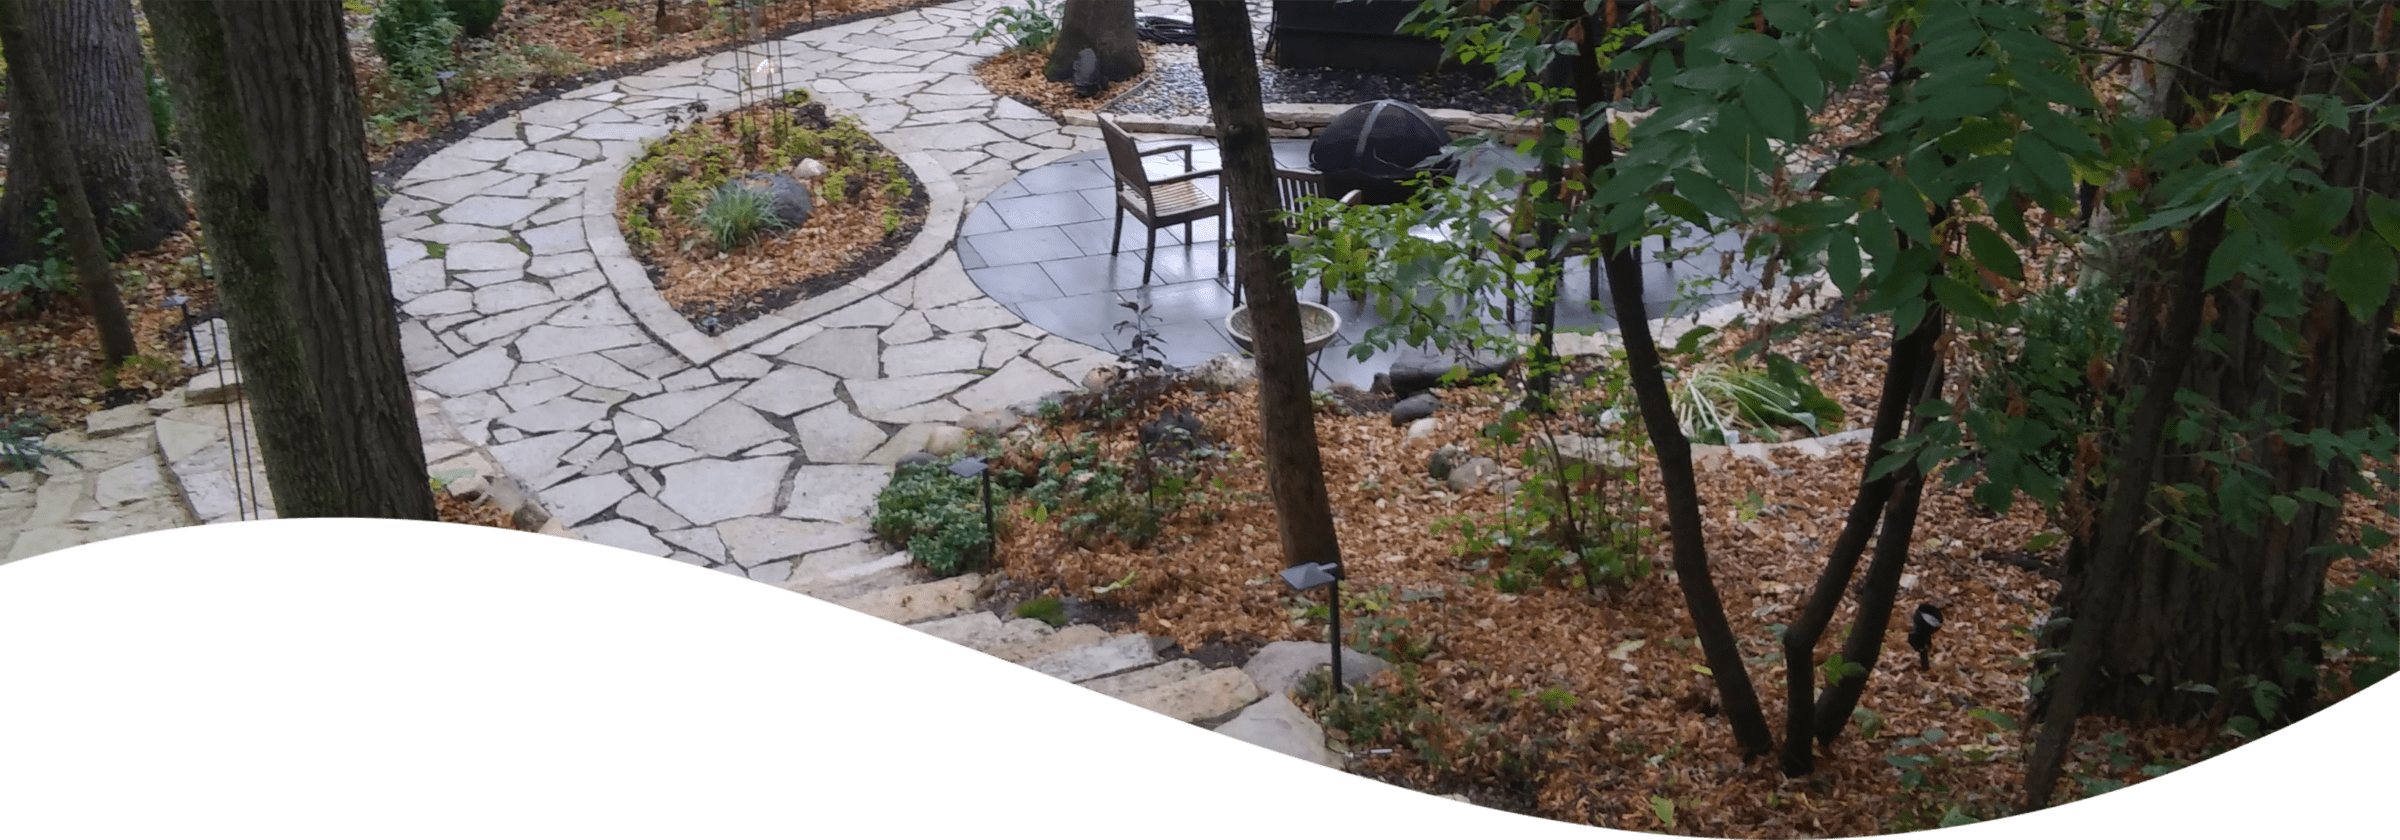 A serene garden pathway meanders through trees and foliage, leading to a small patio area with a table and chairs, suggesting a tranquil outdoor space.